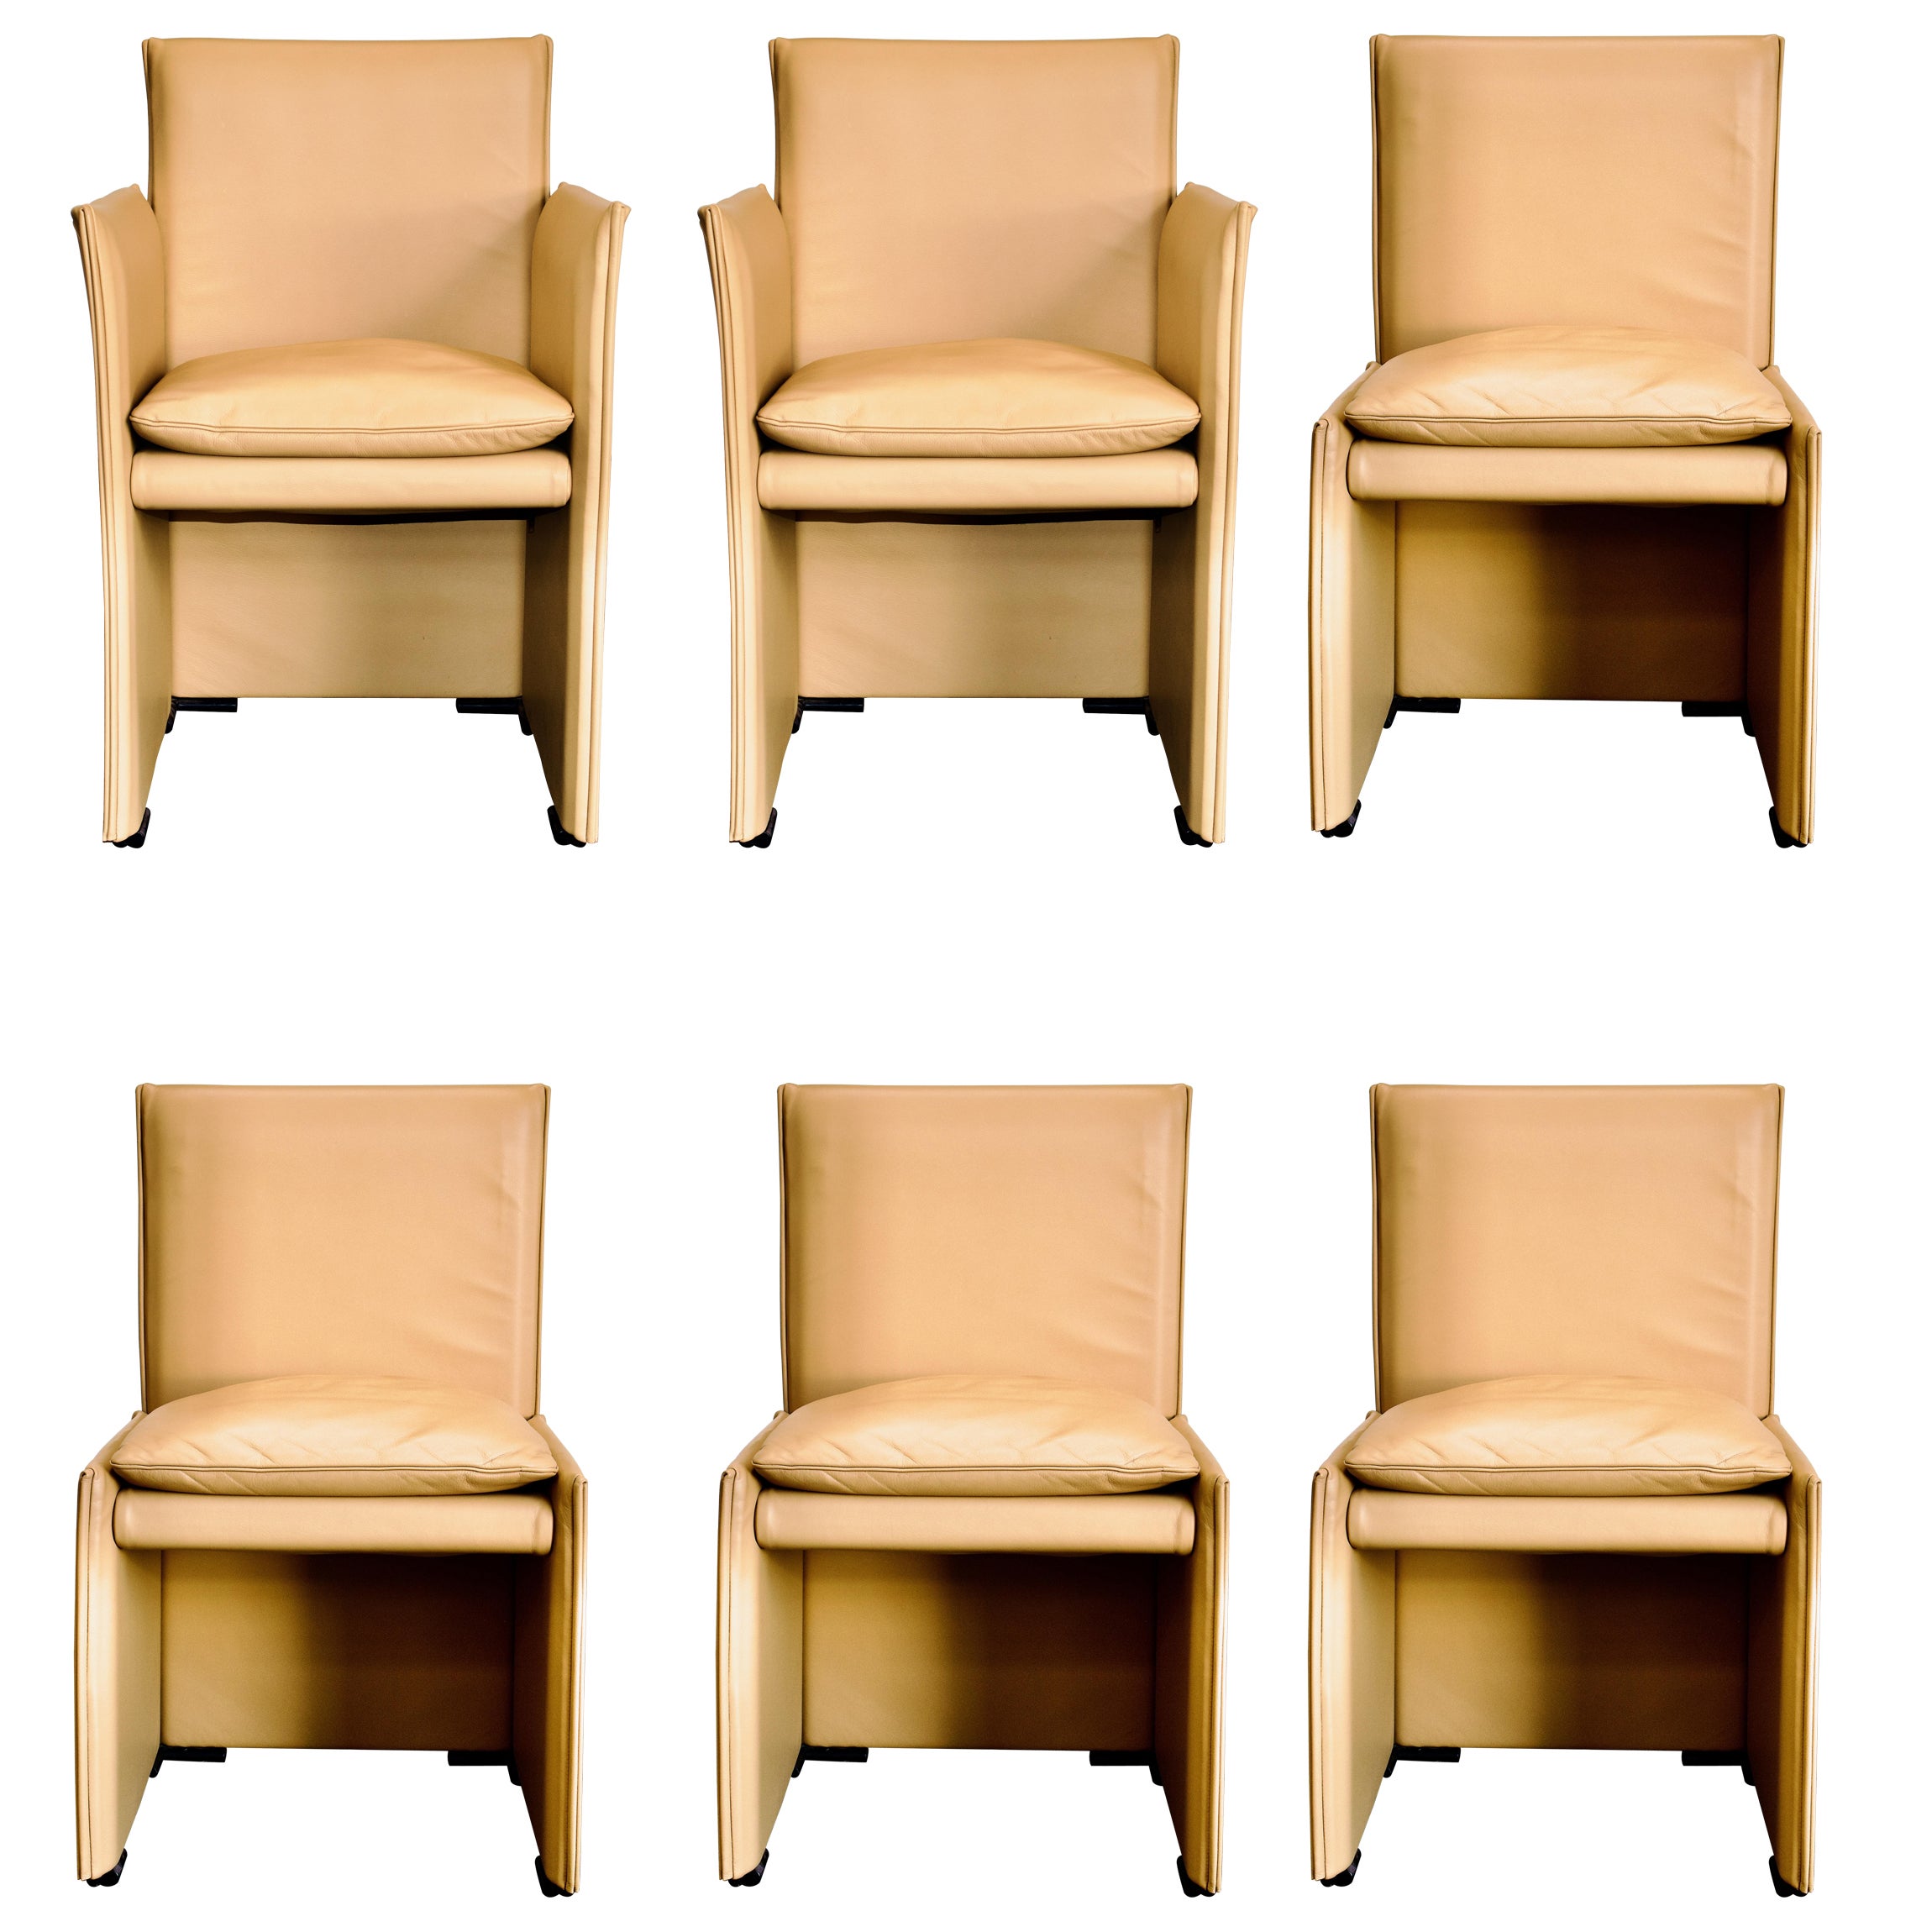 6 Mario Bellini 401 Break Dining Chairs in Tan Leather for Cassina